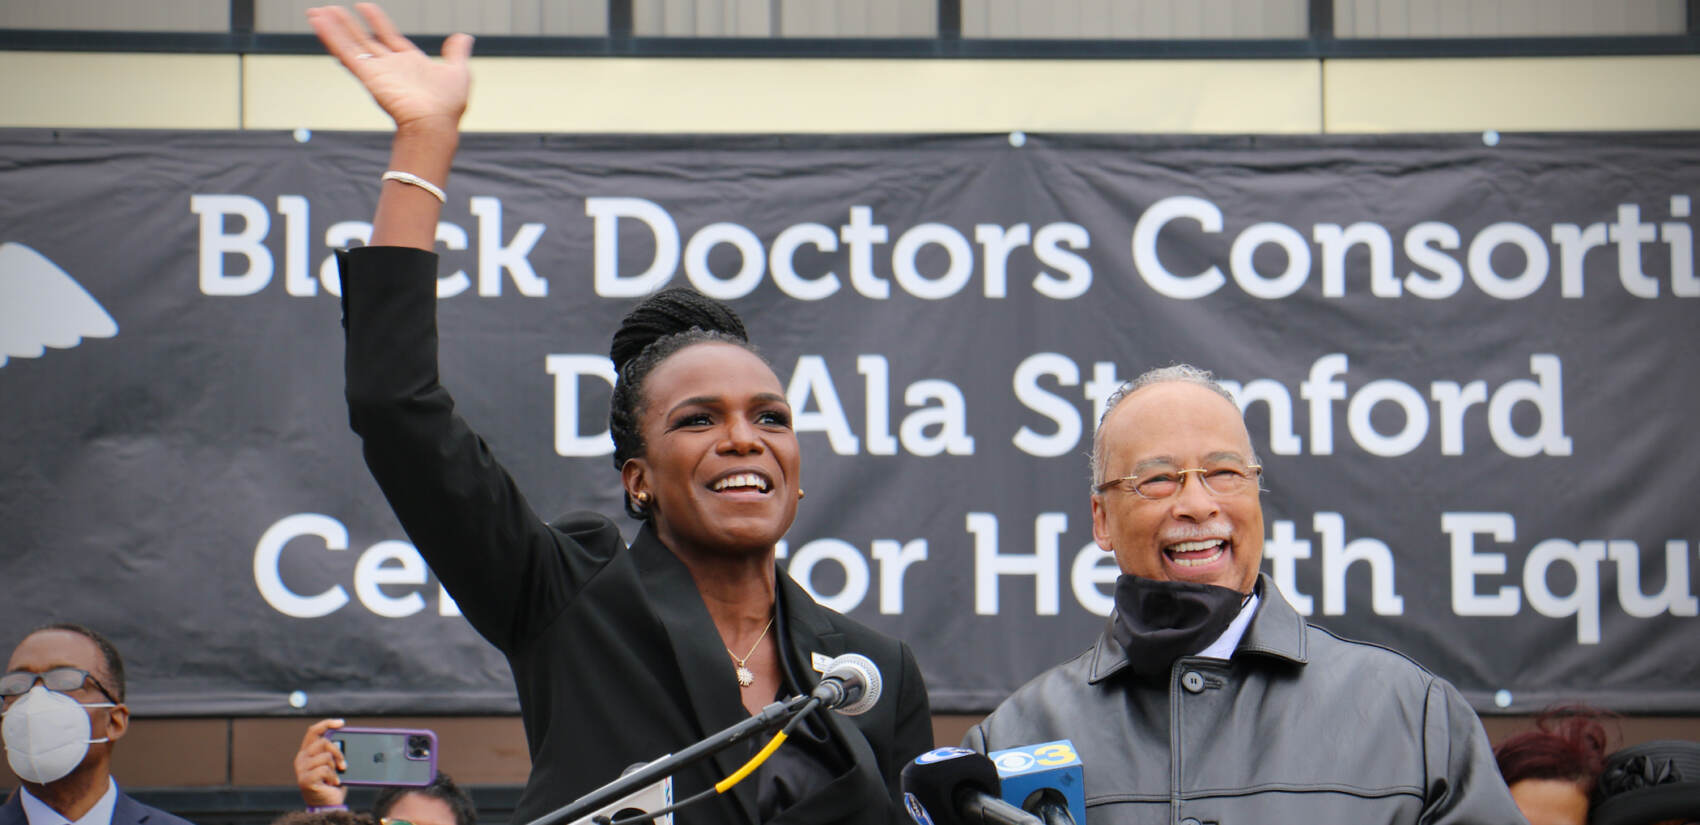 Dr. Ala Stanford speaks glowingly of Pastor Glen Spaulding of the Deliverance Evangelistic Church, which provided the space for her new medical clinic, Black Doctors COVID Consortium, in North Philadelphia.